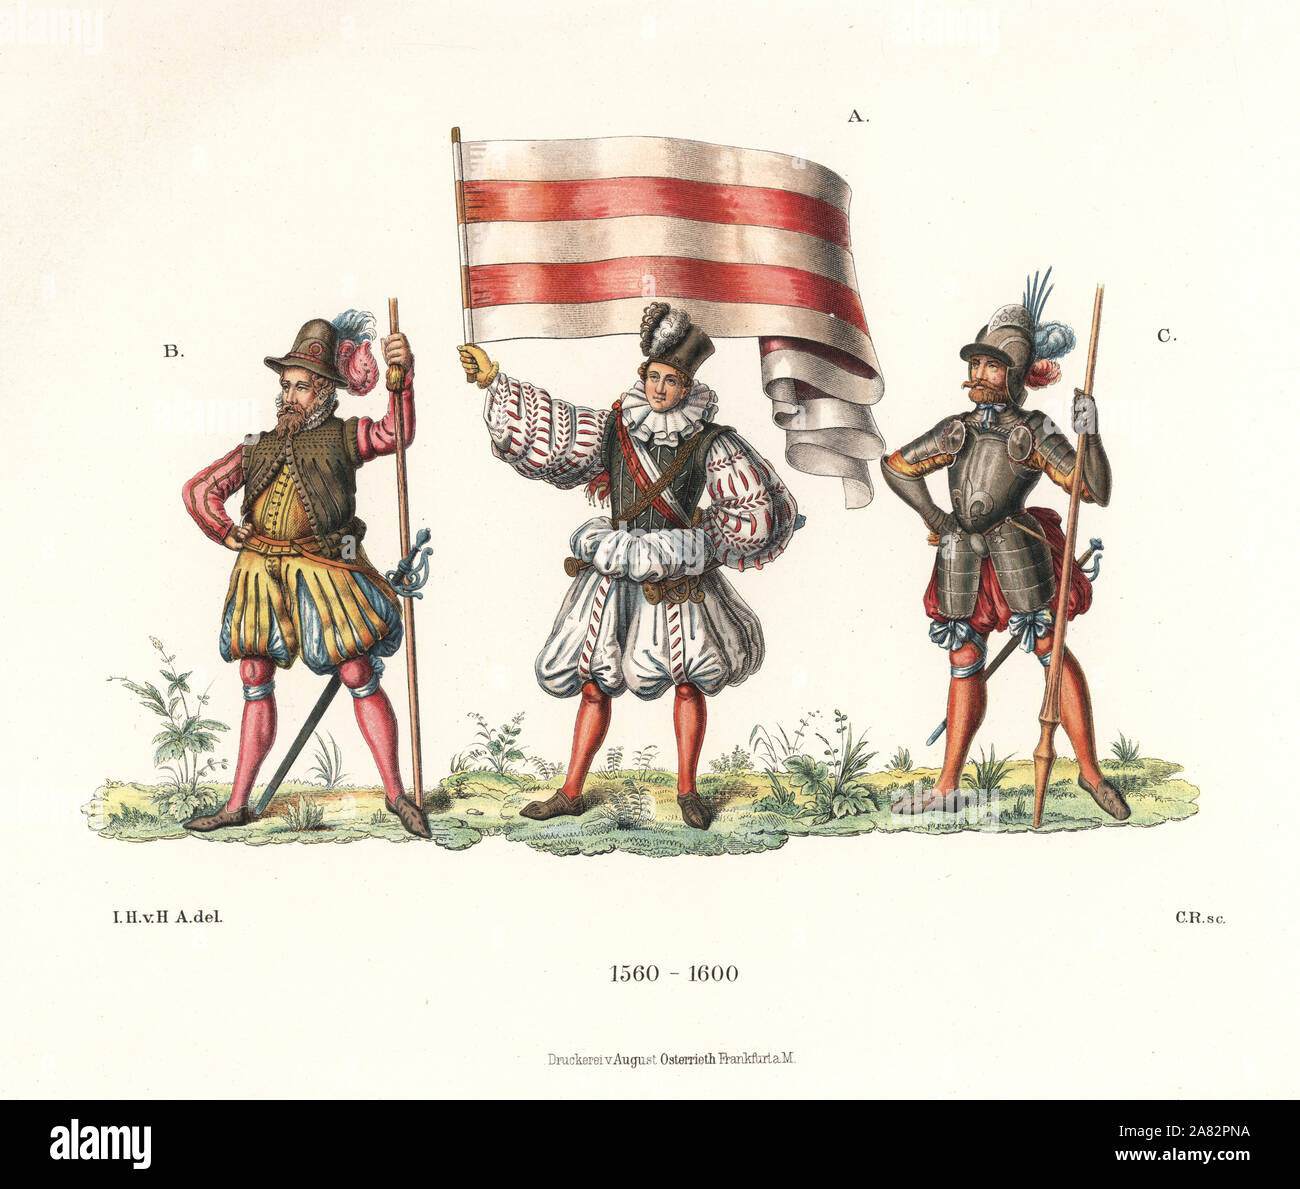 Young man in slashed doublet and hose with flag A, man in doublet and hose B, and man in armour and helmet, late 16th century. Chromolithograph from Hefner-Alteneck's Costumes, Artworks and Appliances from the Middle Ages to the 17th Century, Frankfurt, 1889. Illustration by Dr. Jakob Heinrich von Hefner-Alteneck, lithographed by C. Regnier. Dr. Hefner-Alteneck (1811-1903) was a German museum curator, archaeologist, art historian, illustrator and etcher. Stock Photo